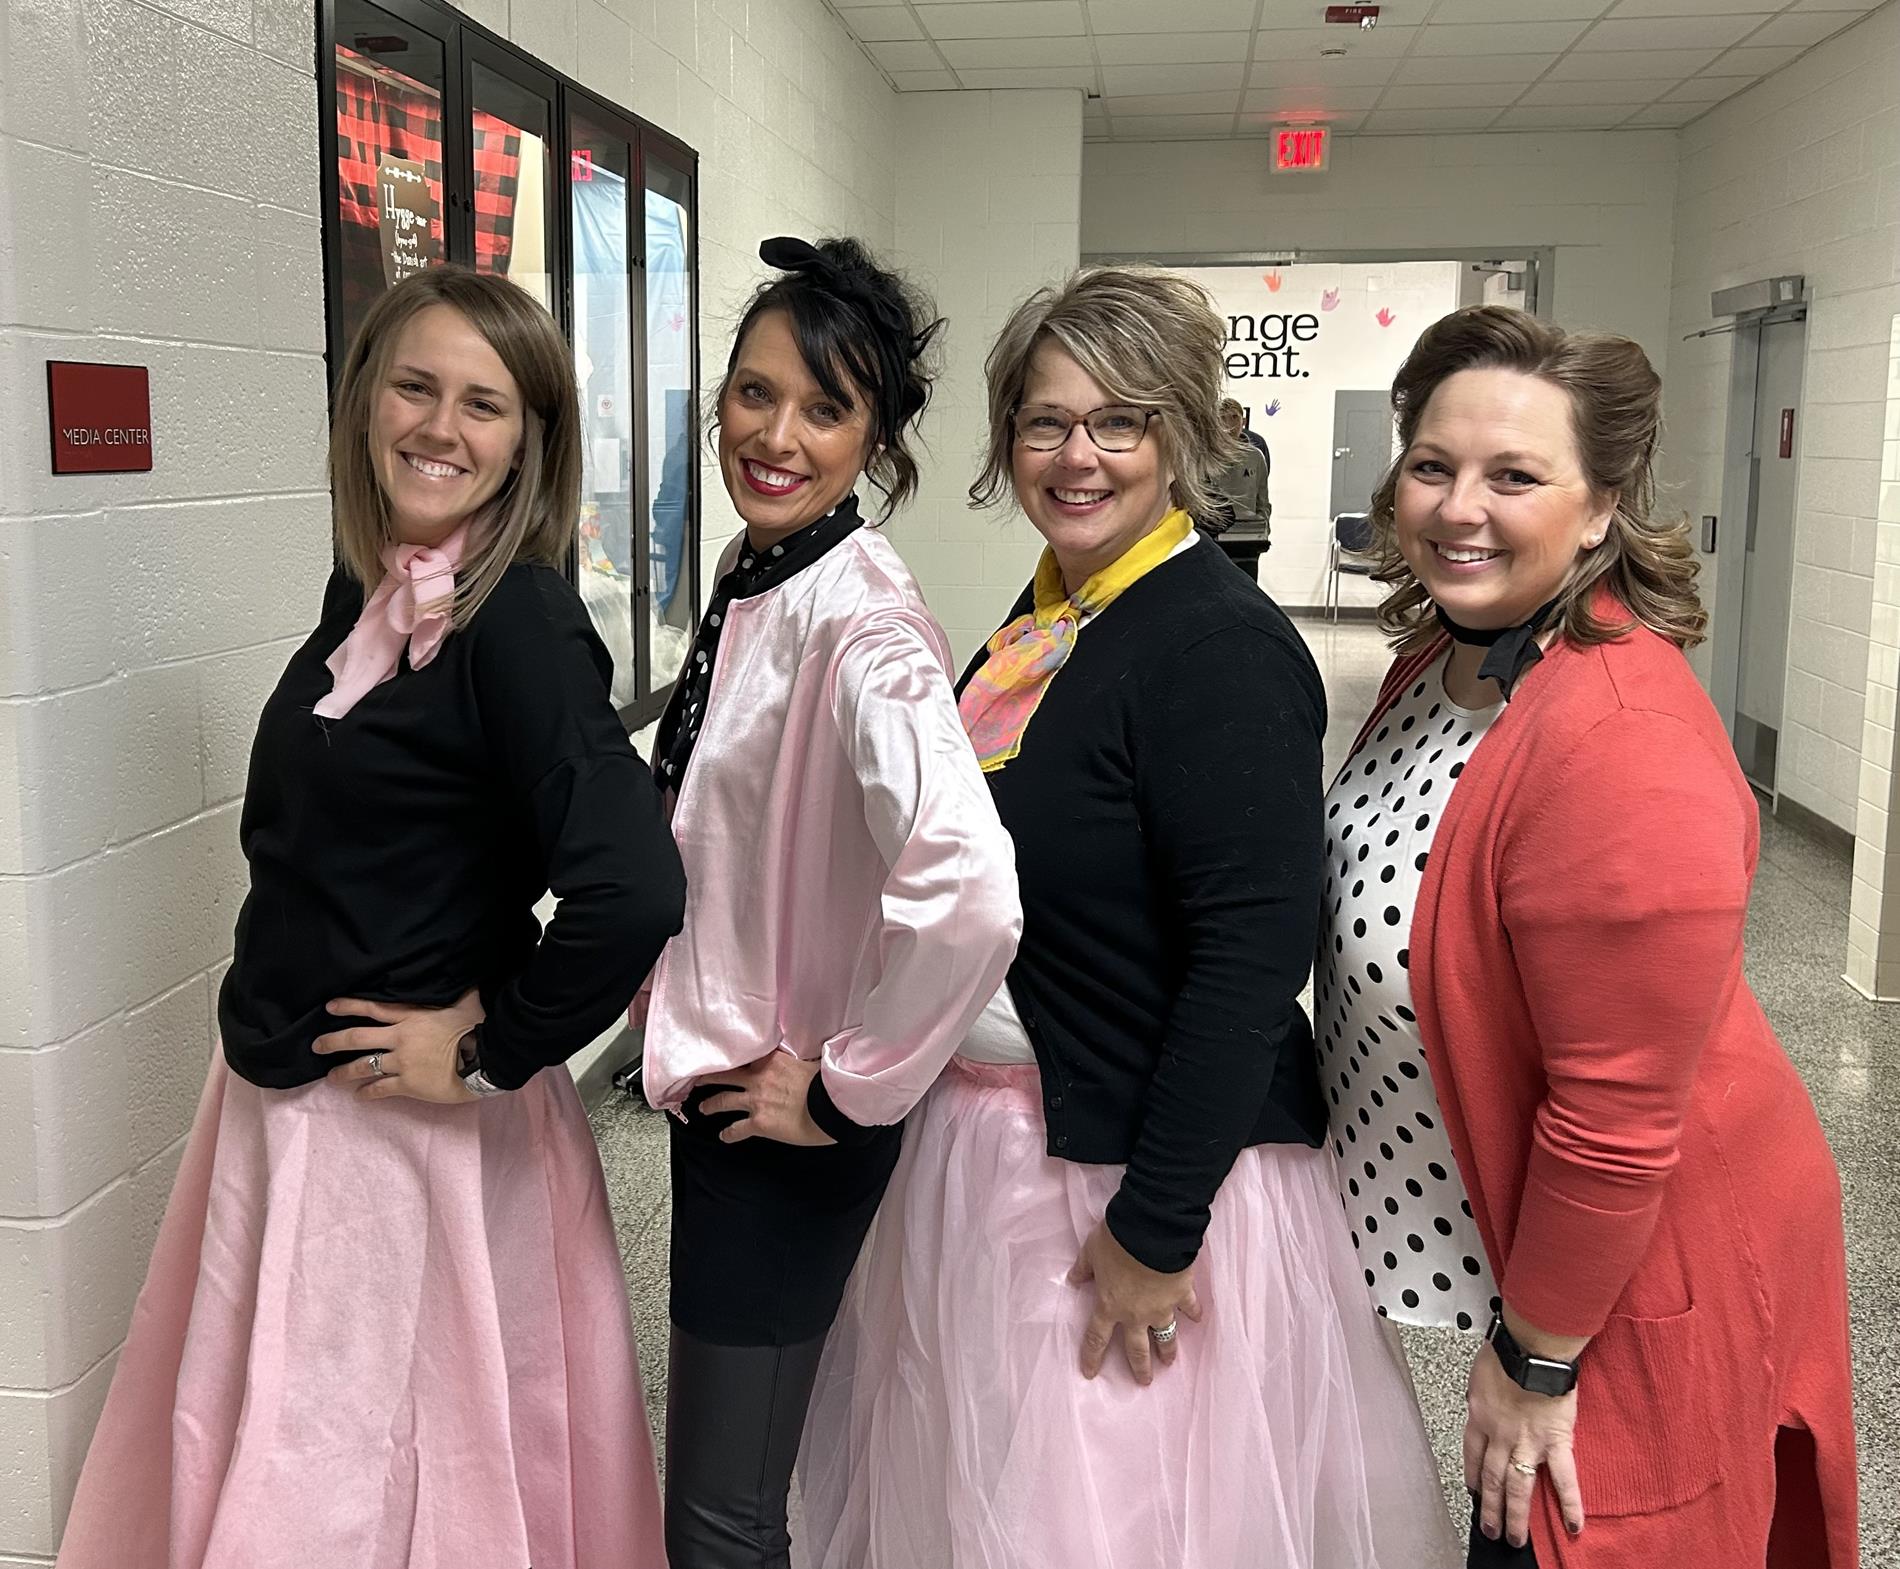 staff dressed up for 50s